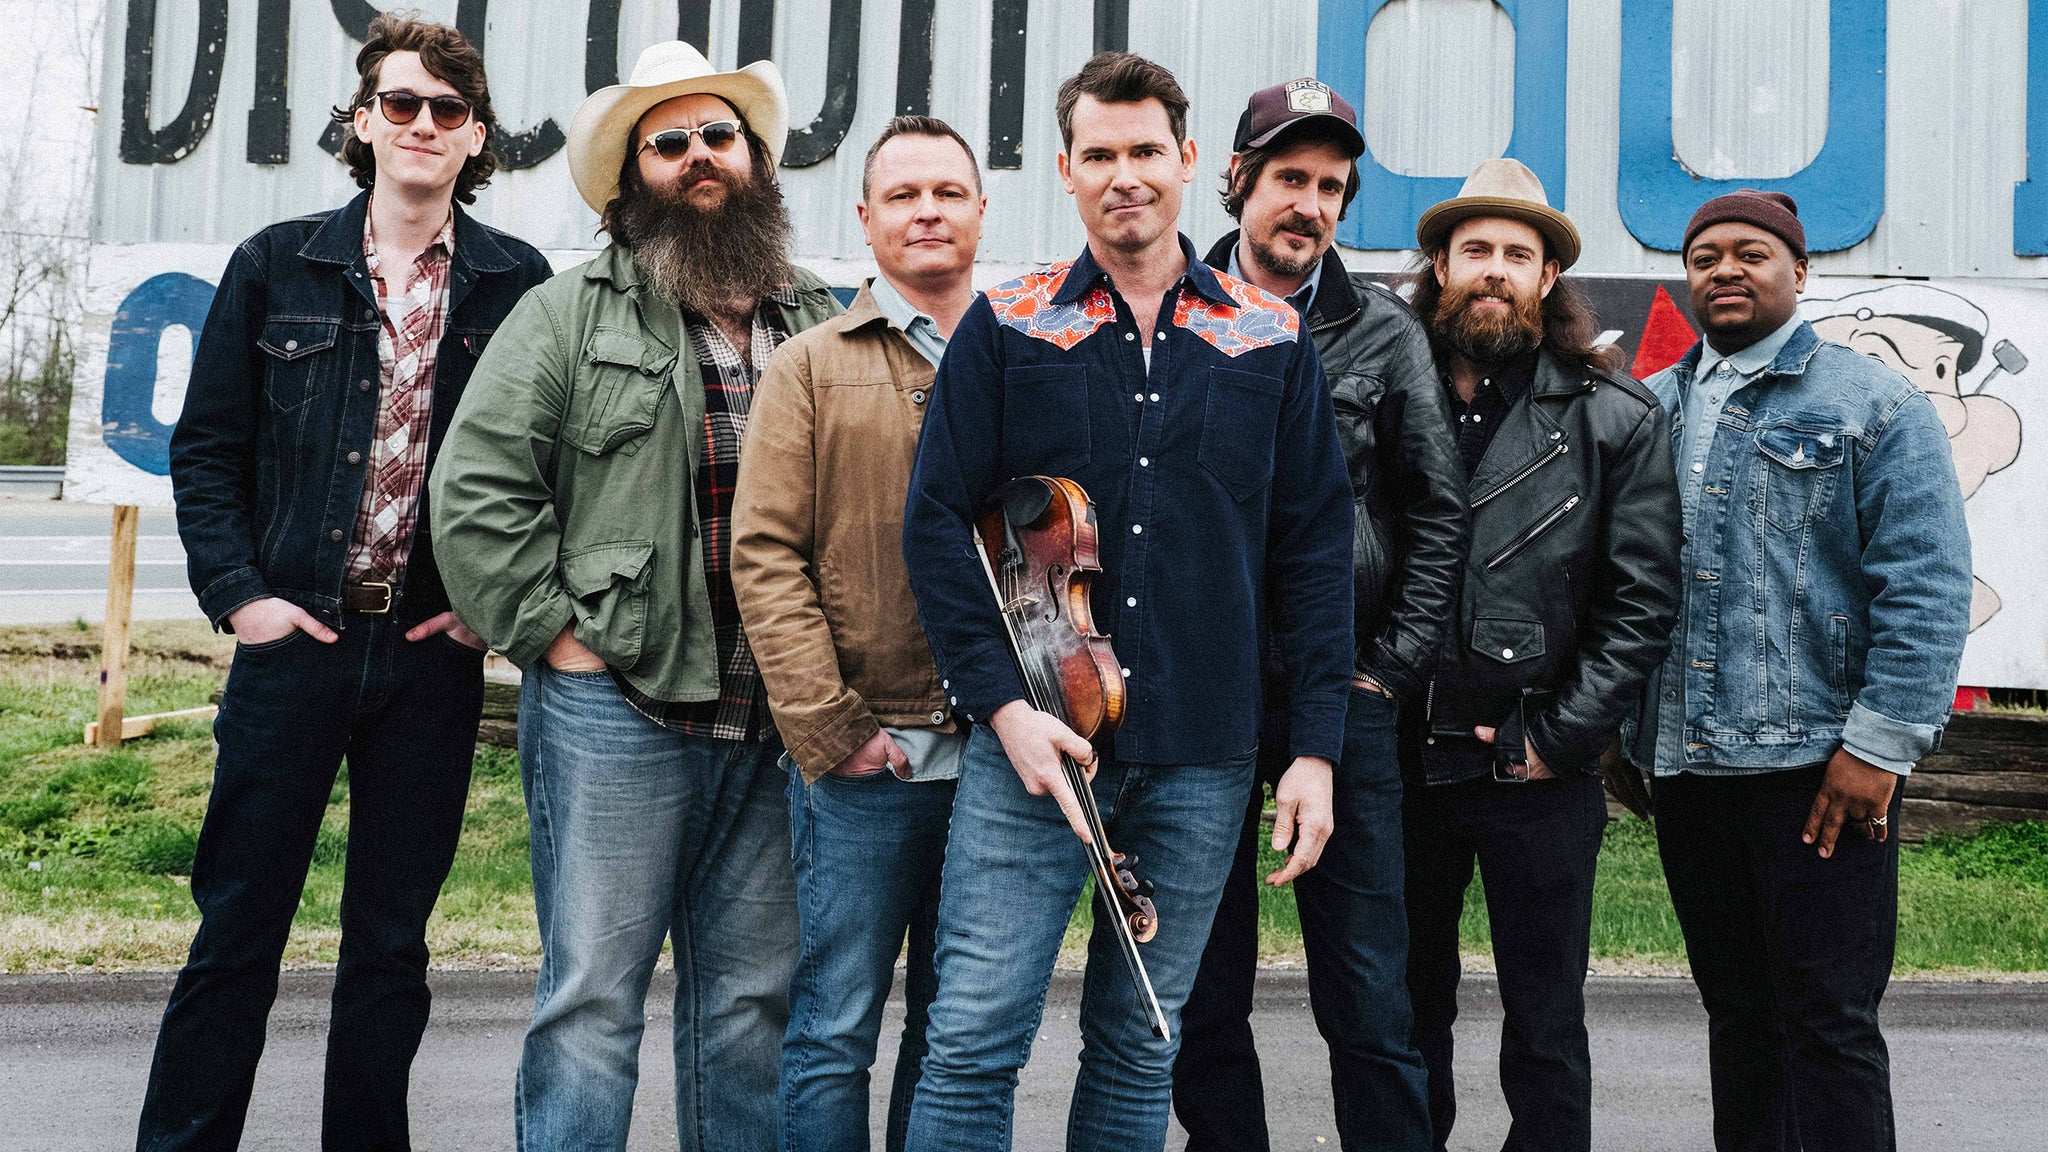 WXPN Welcomes Old Crow Medicine Show